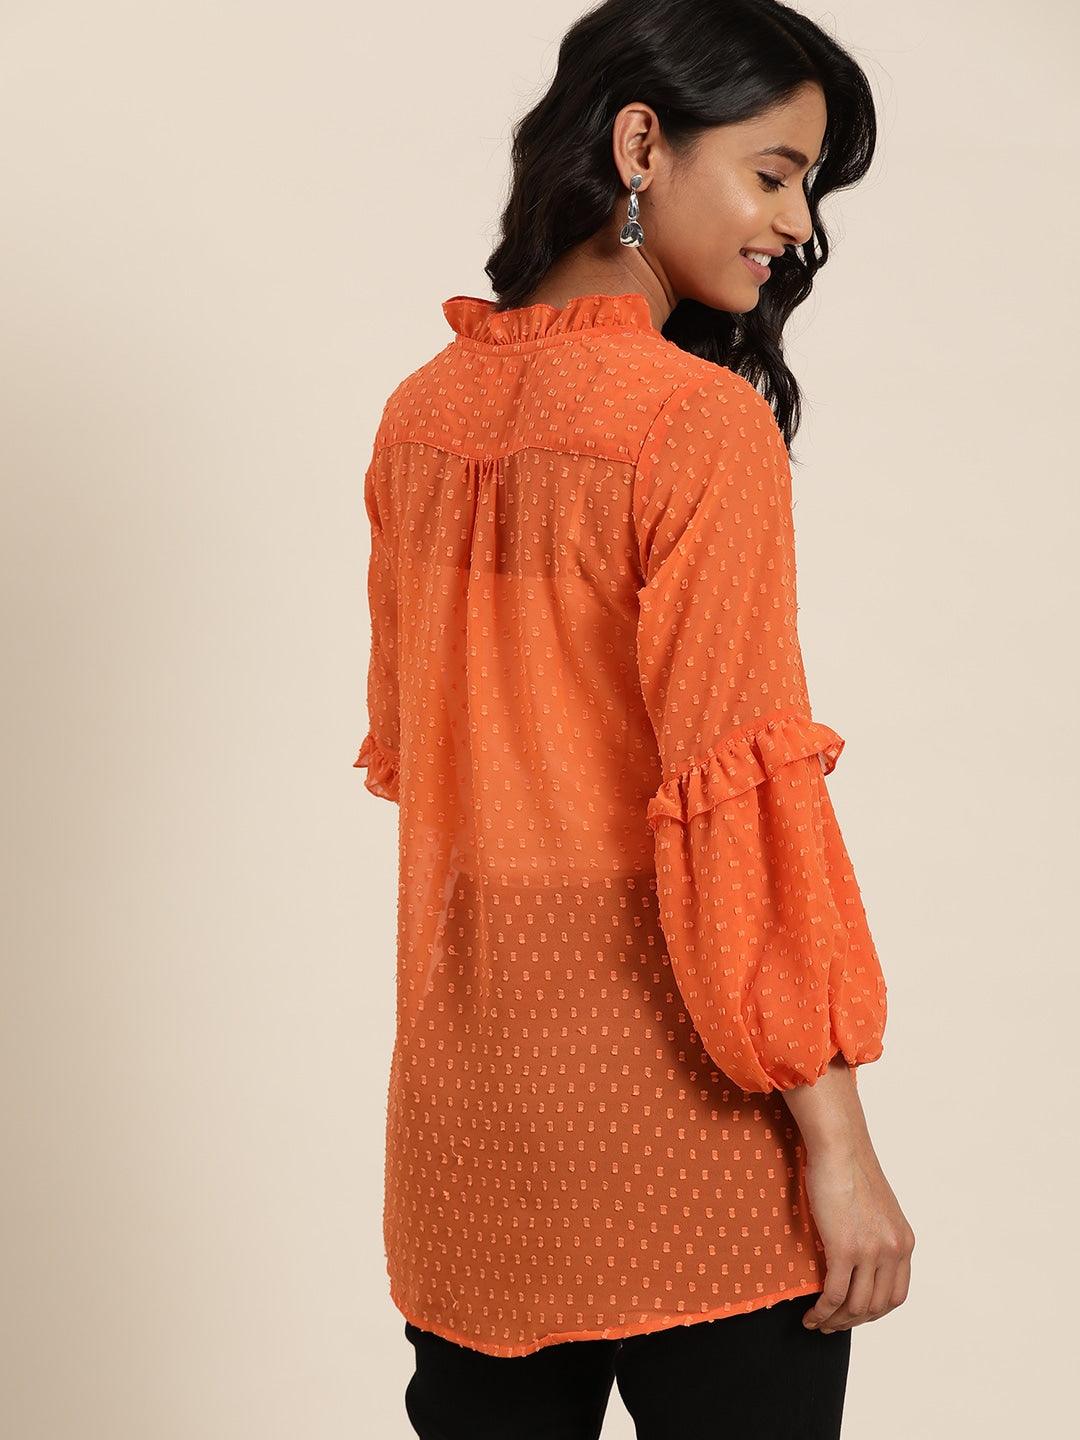 Qurvii Orange Solid Keyhole Neck Puff Sleeves Dobby Weave Top - Qurvii India